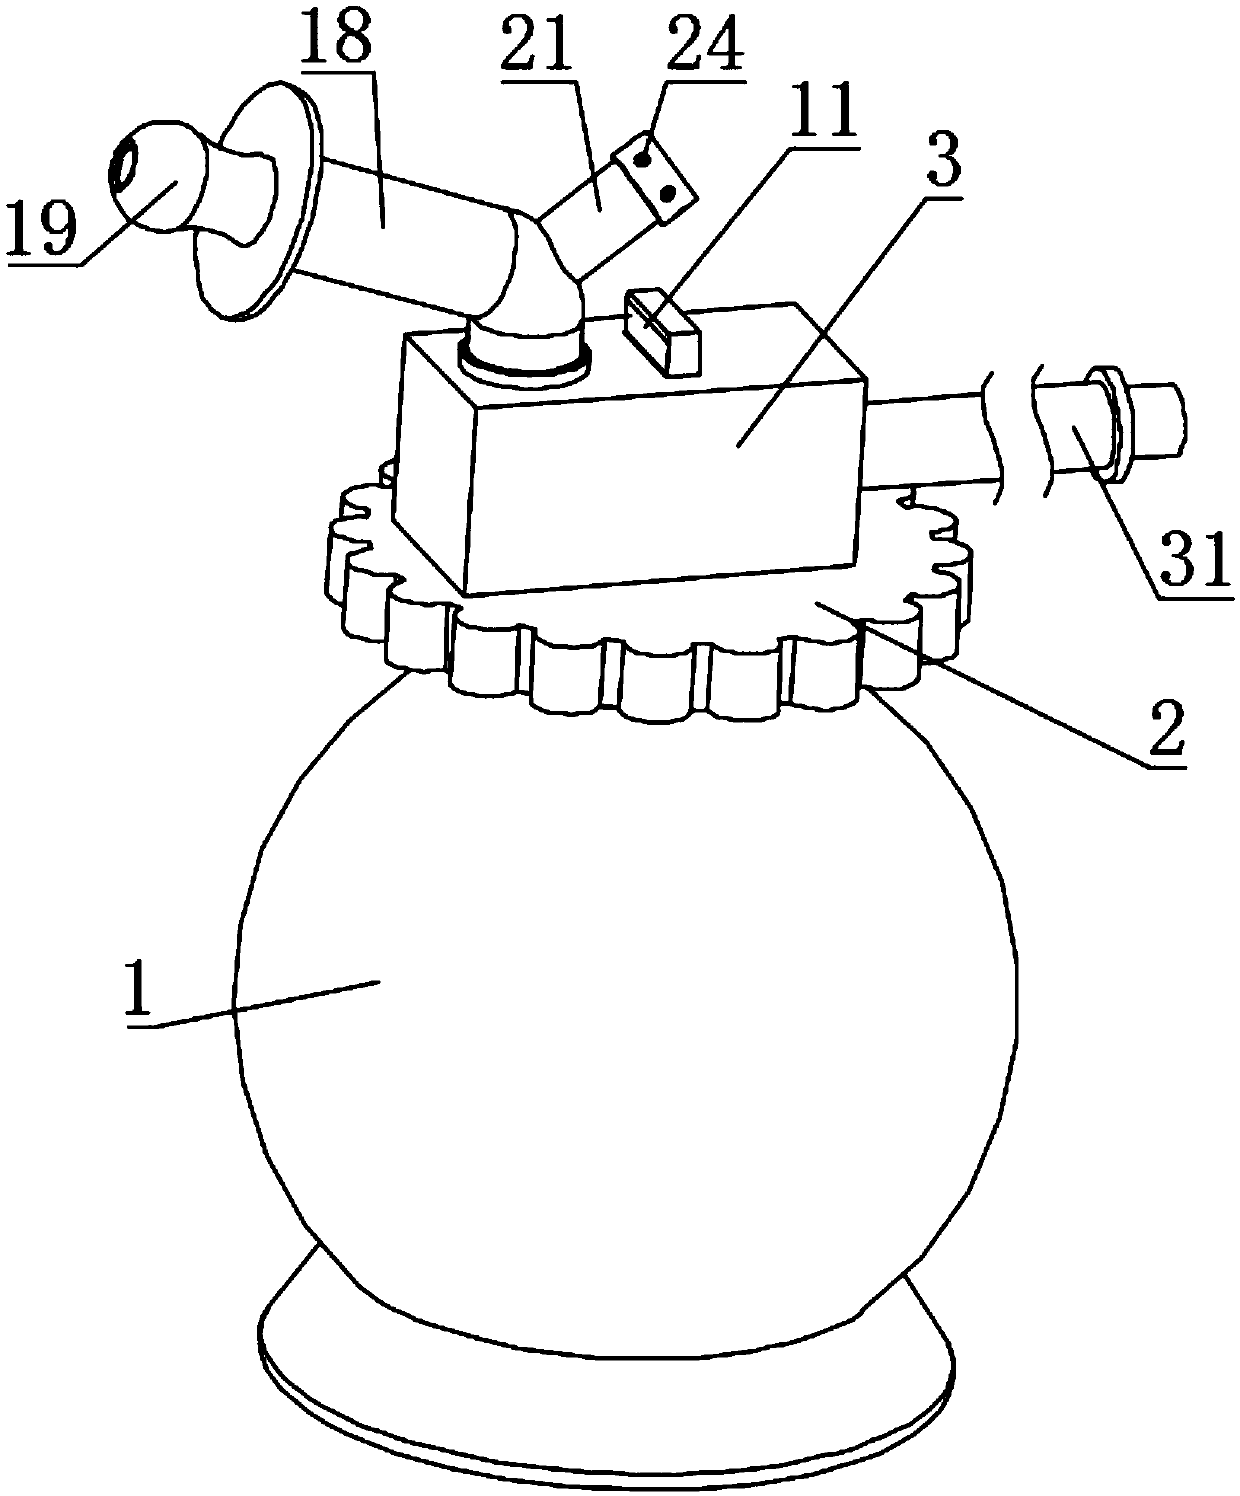 Novel nebulizer with reflux structure